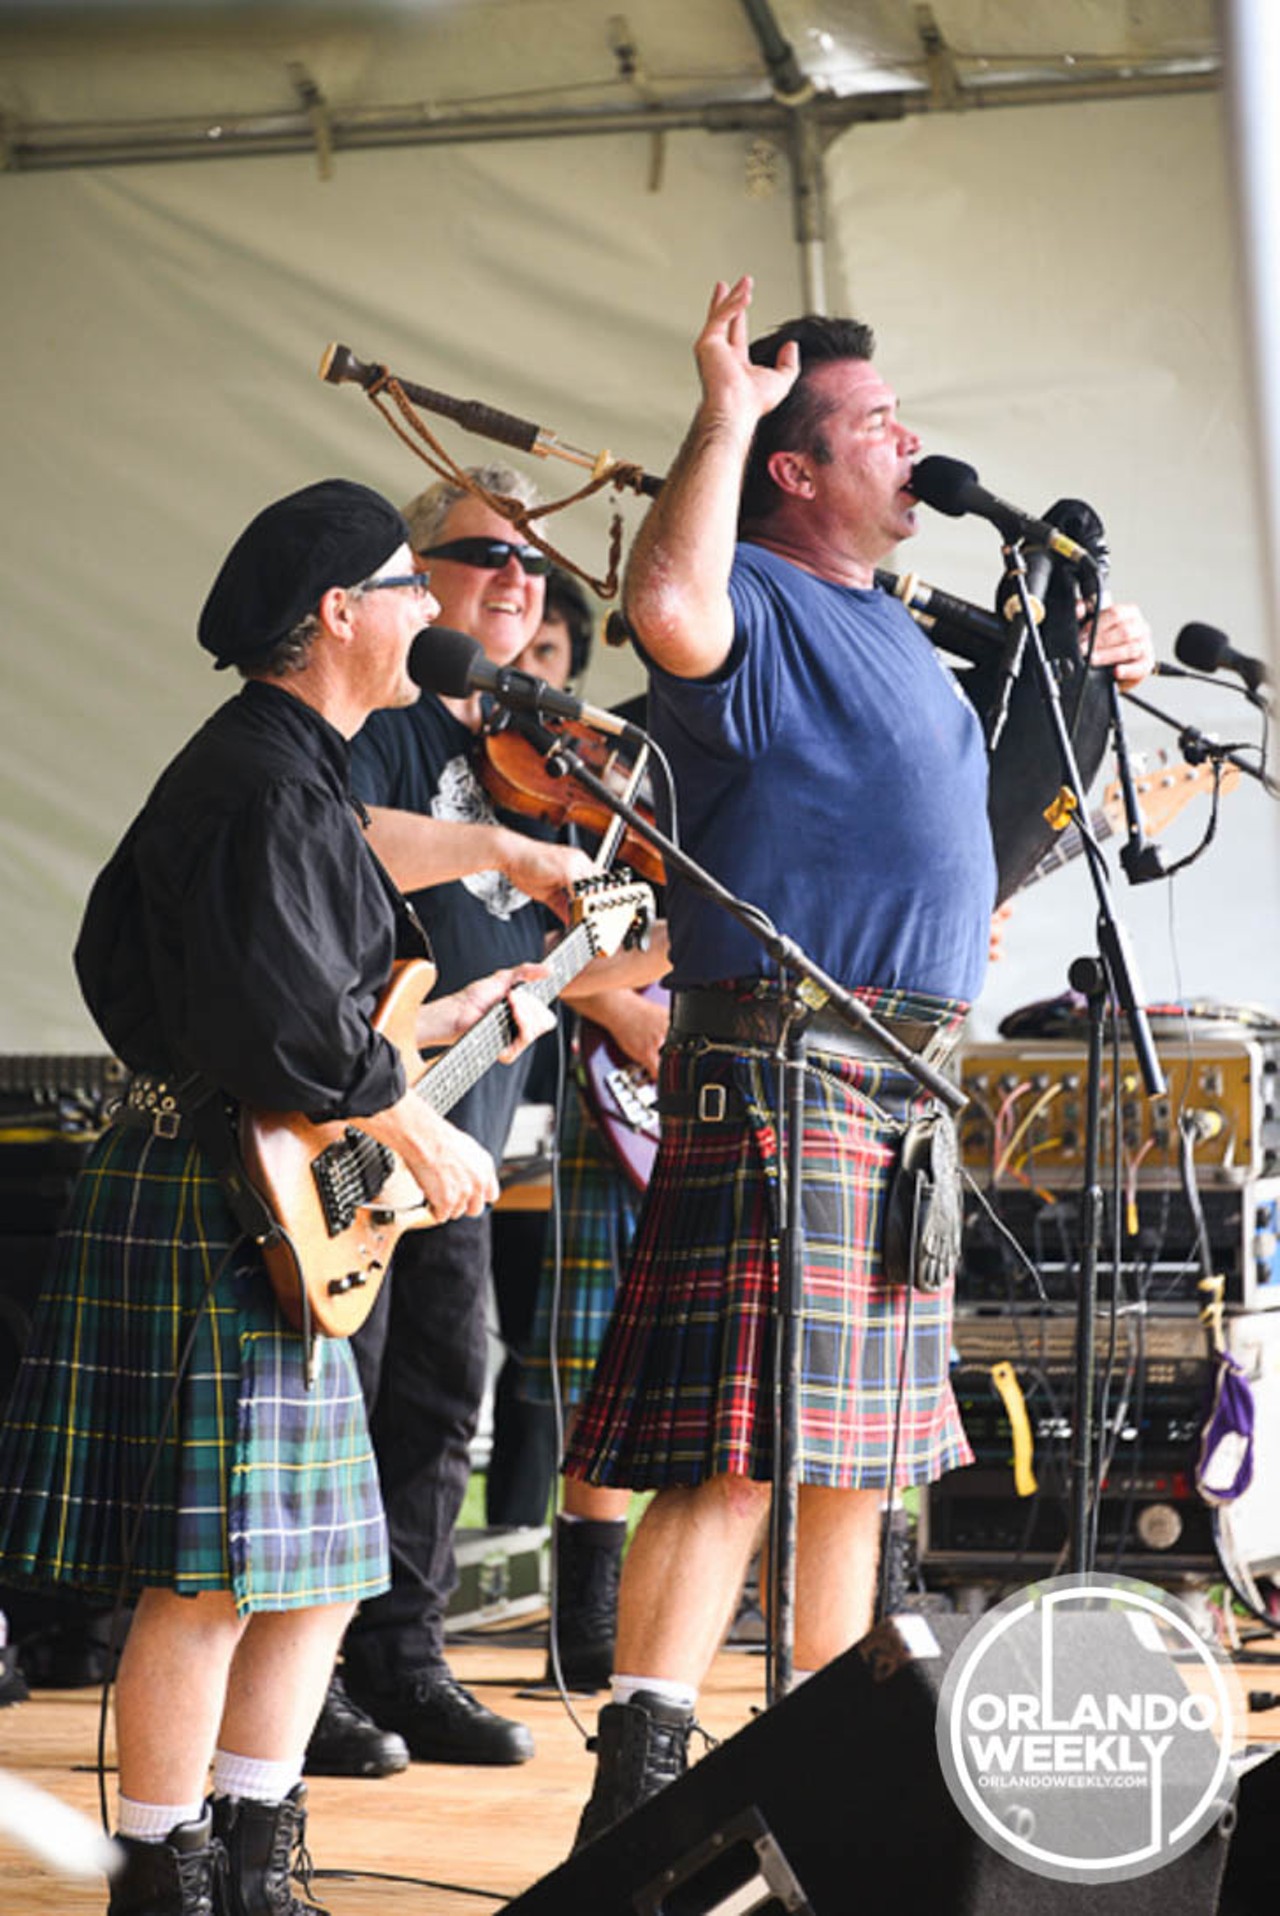 35 photos from Central Florida's Scottish Highland Games